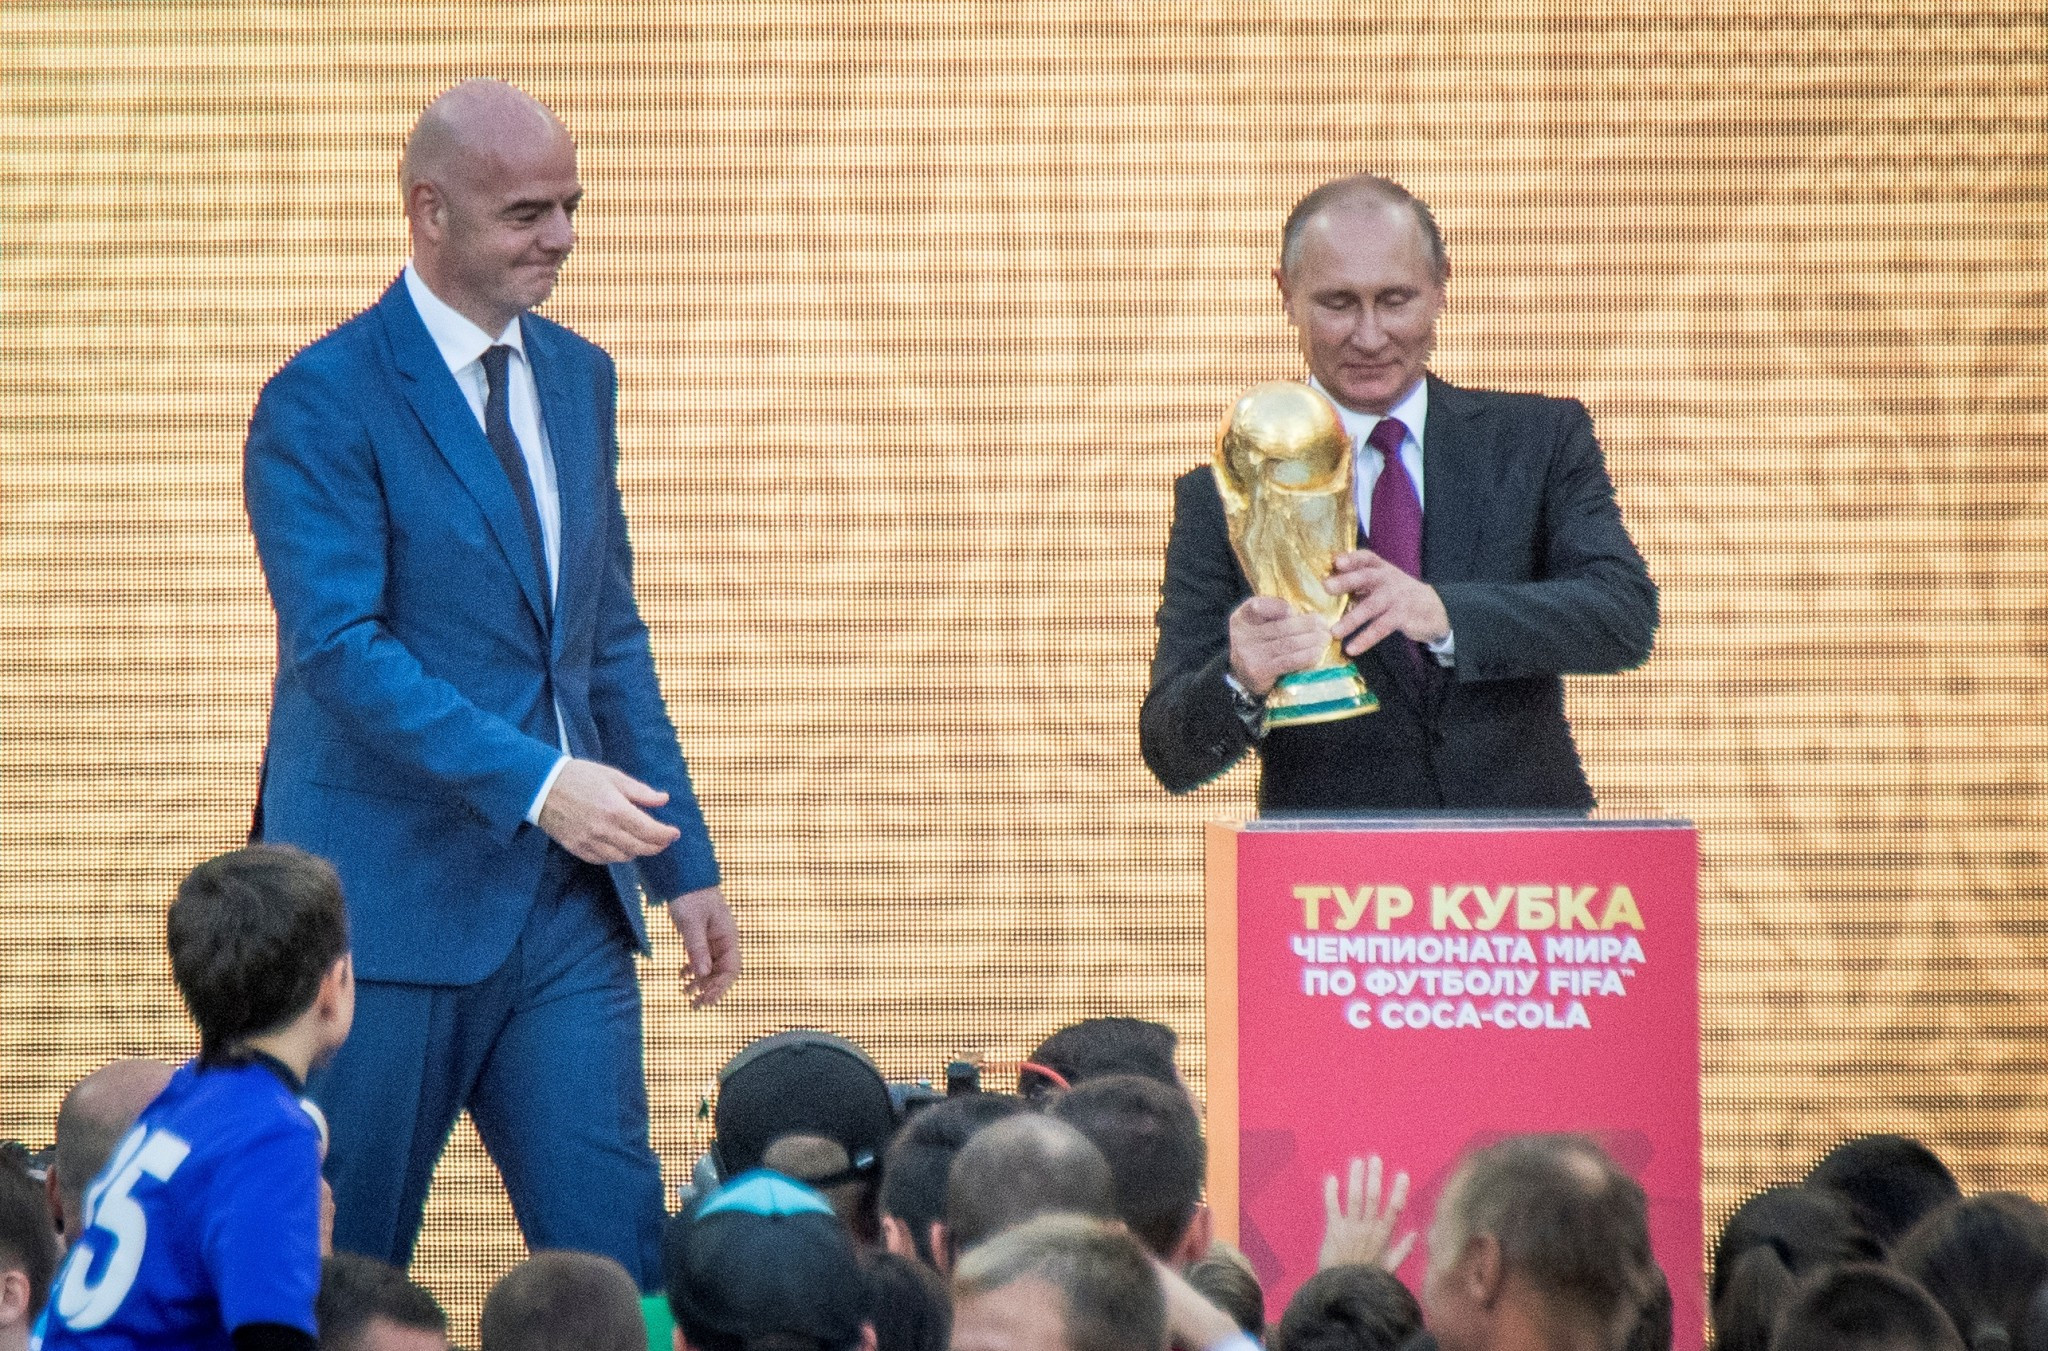 Putin and Infantino on hand to begin 2018 World Cup trophy tour